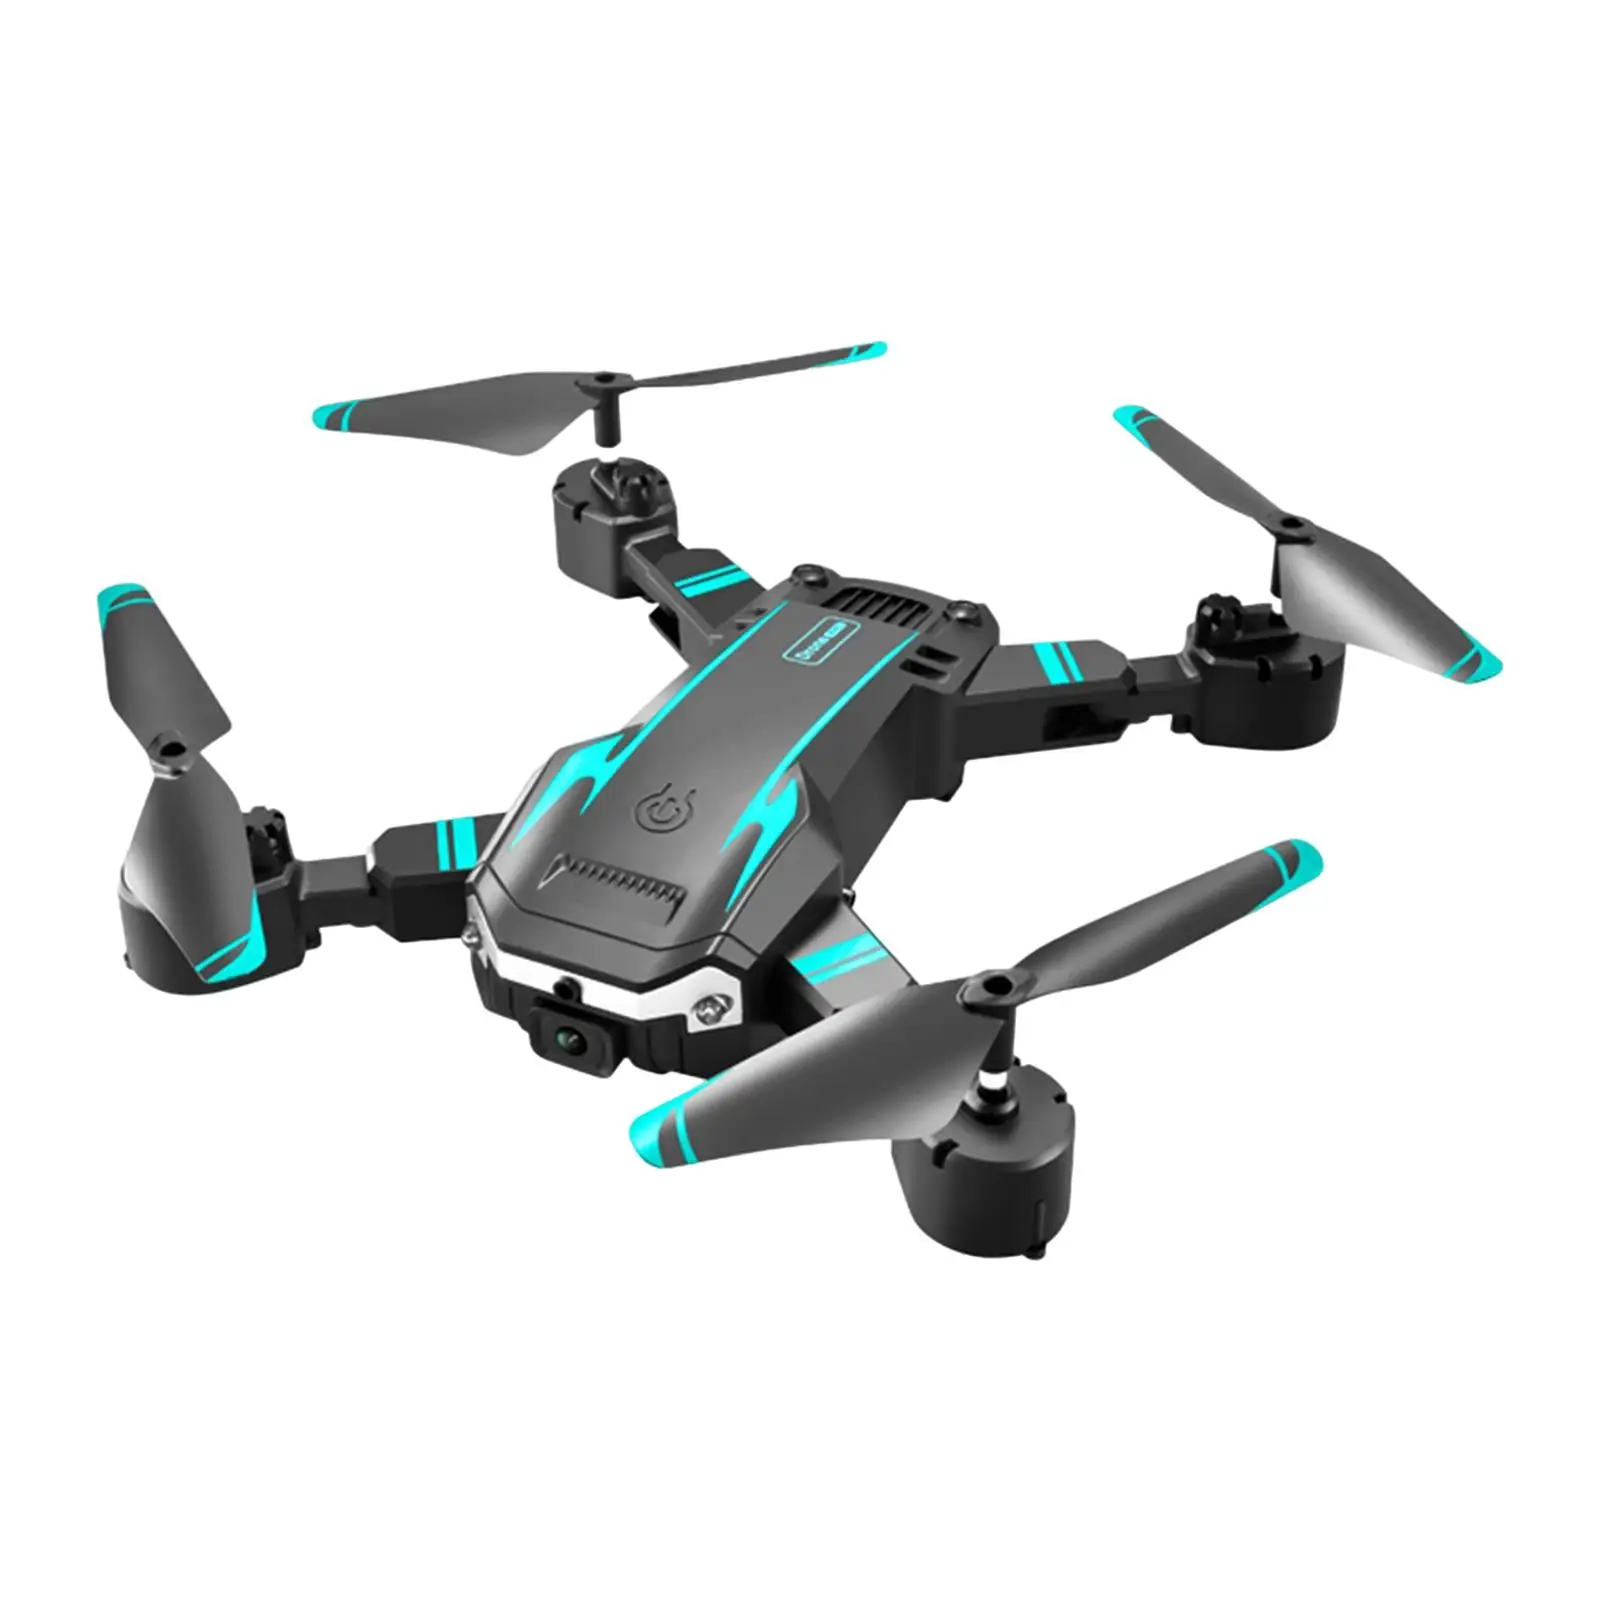 Remote Control Quadcopter Distance: 100M Professional Kids Toys Remote Control Toys for Beginner Girls Adults Boys Birthday Gift